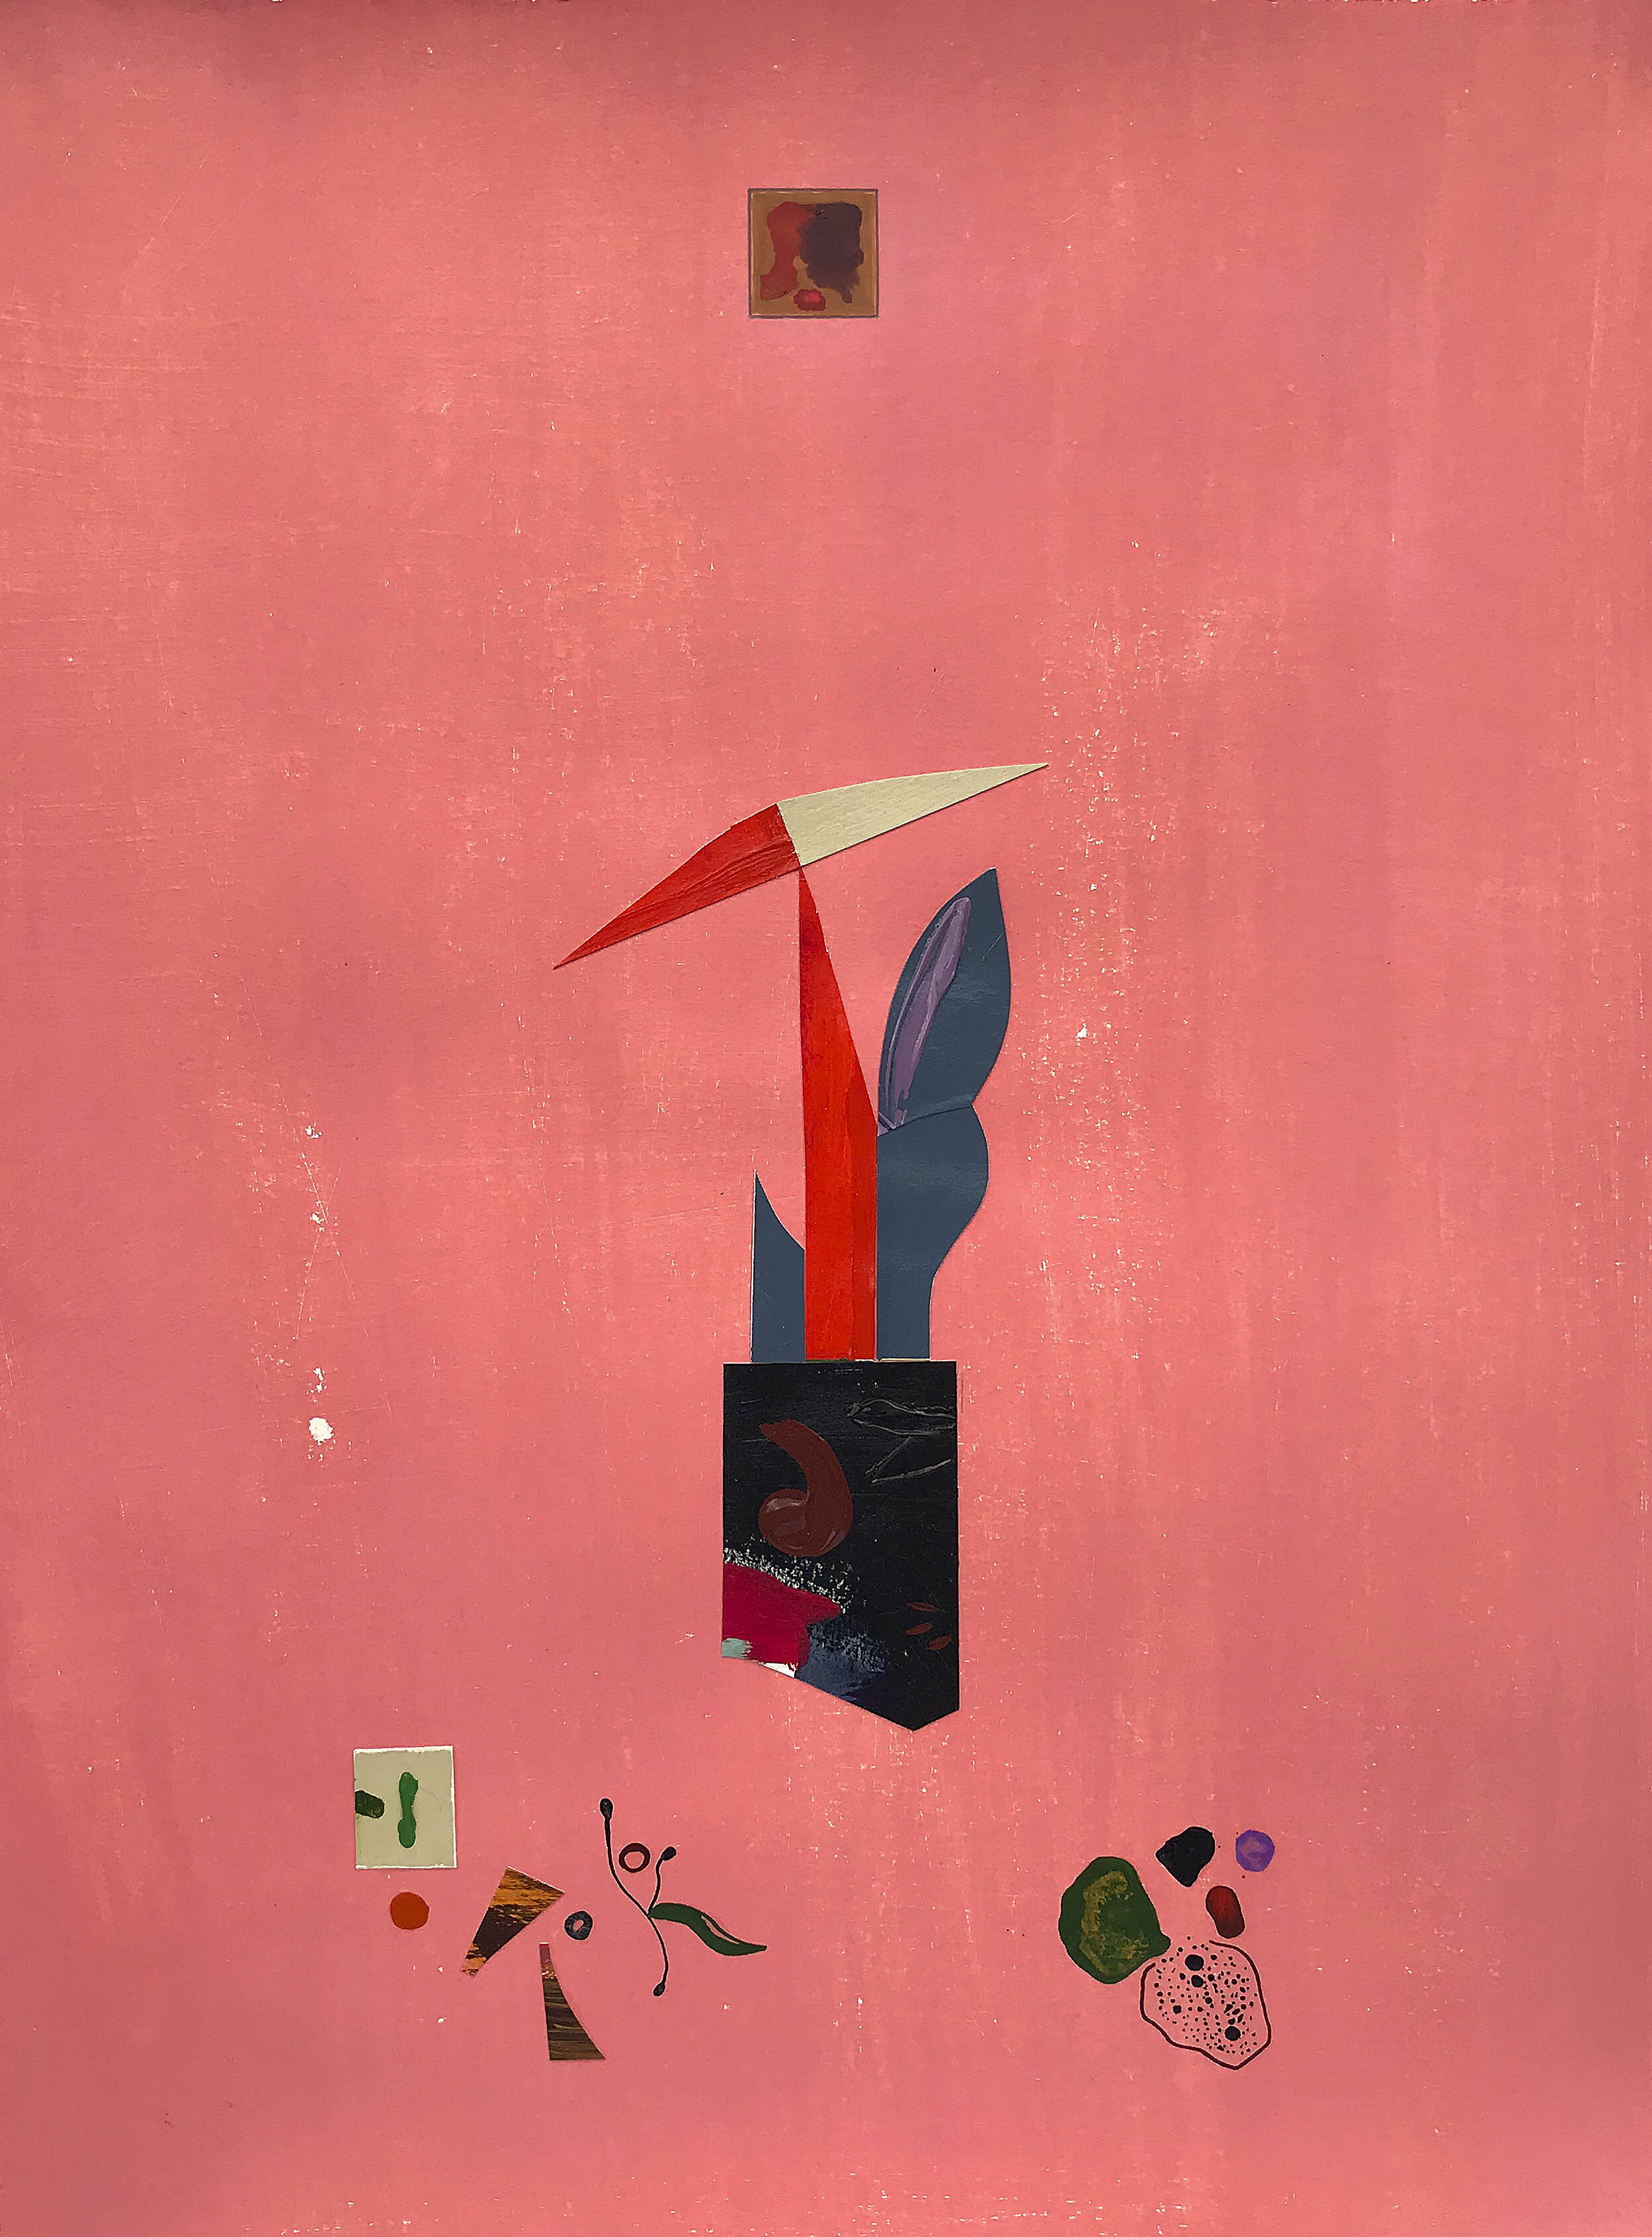    Pink Totem  , 2019  Mixed media on paper  24 x 18 in. 